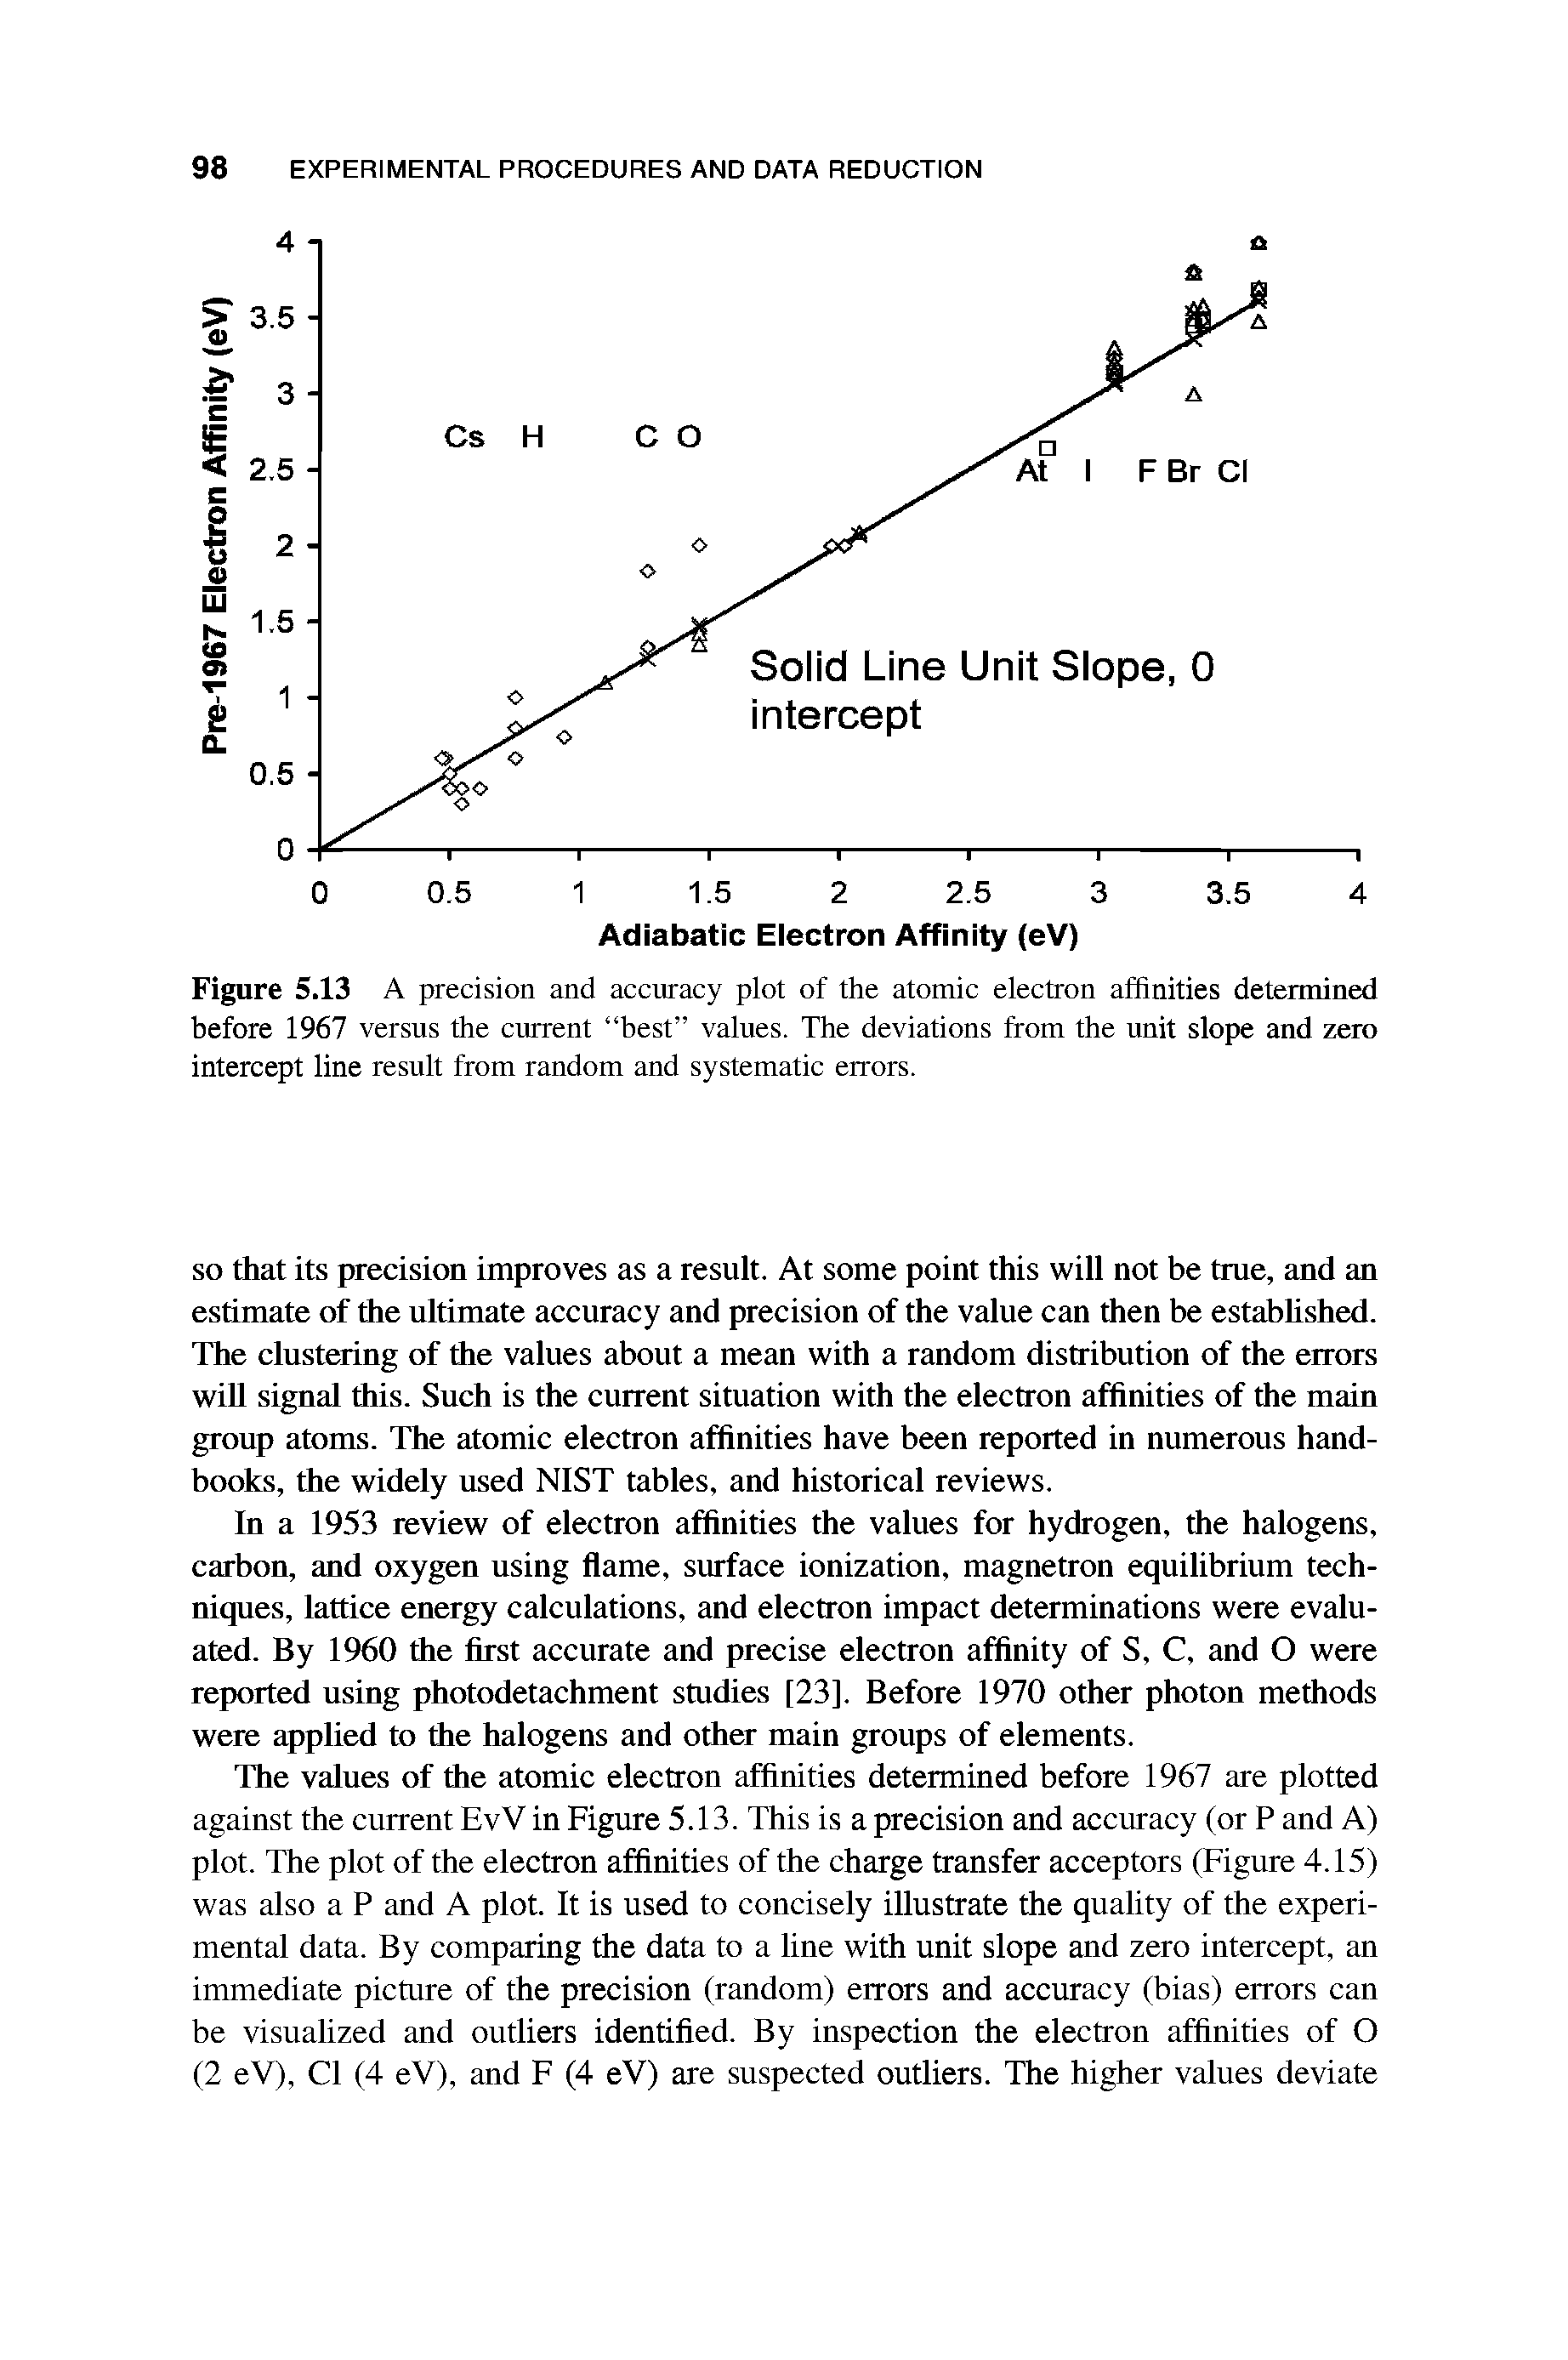 Figure 5.13 A precision and accuracy plot of the atomic electron affinities determined before 1967 versus the current best values. The deviations from the unit slope and zero intercept line result from random and systematic errors.